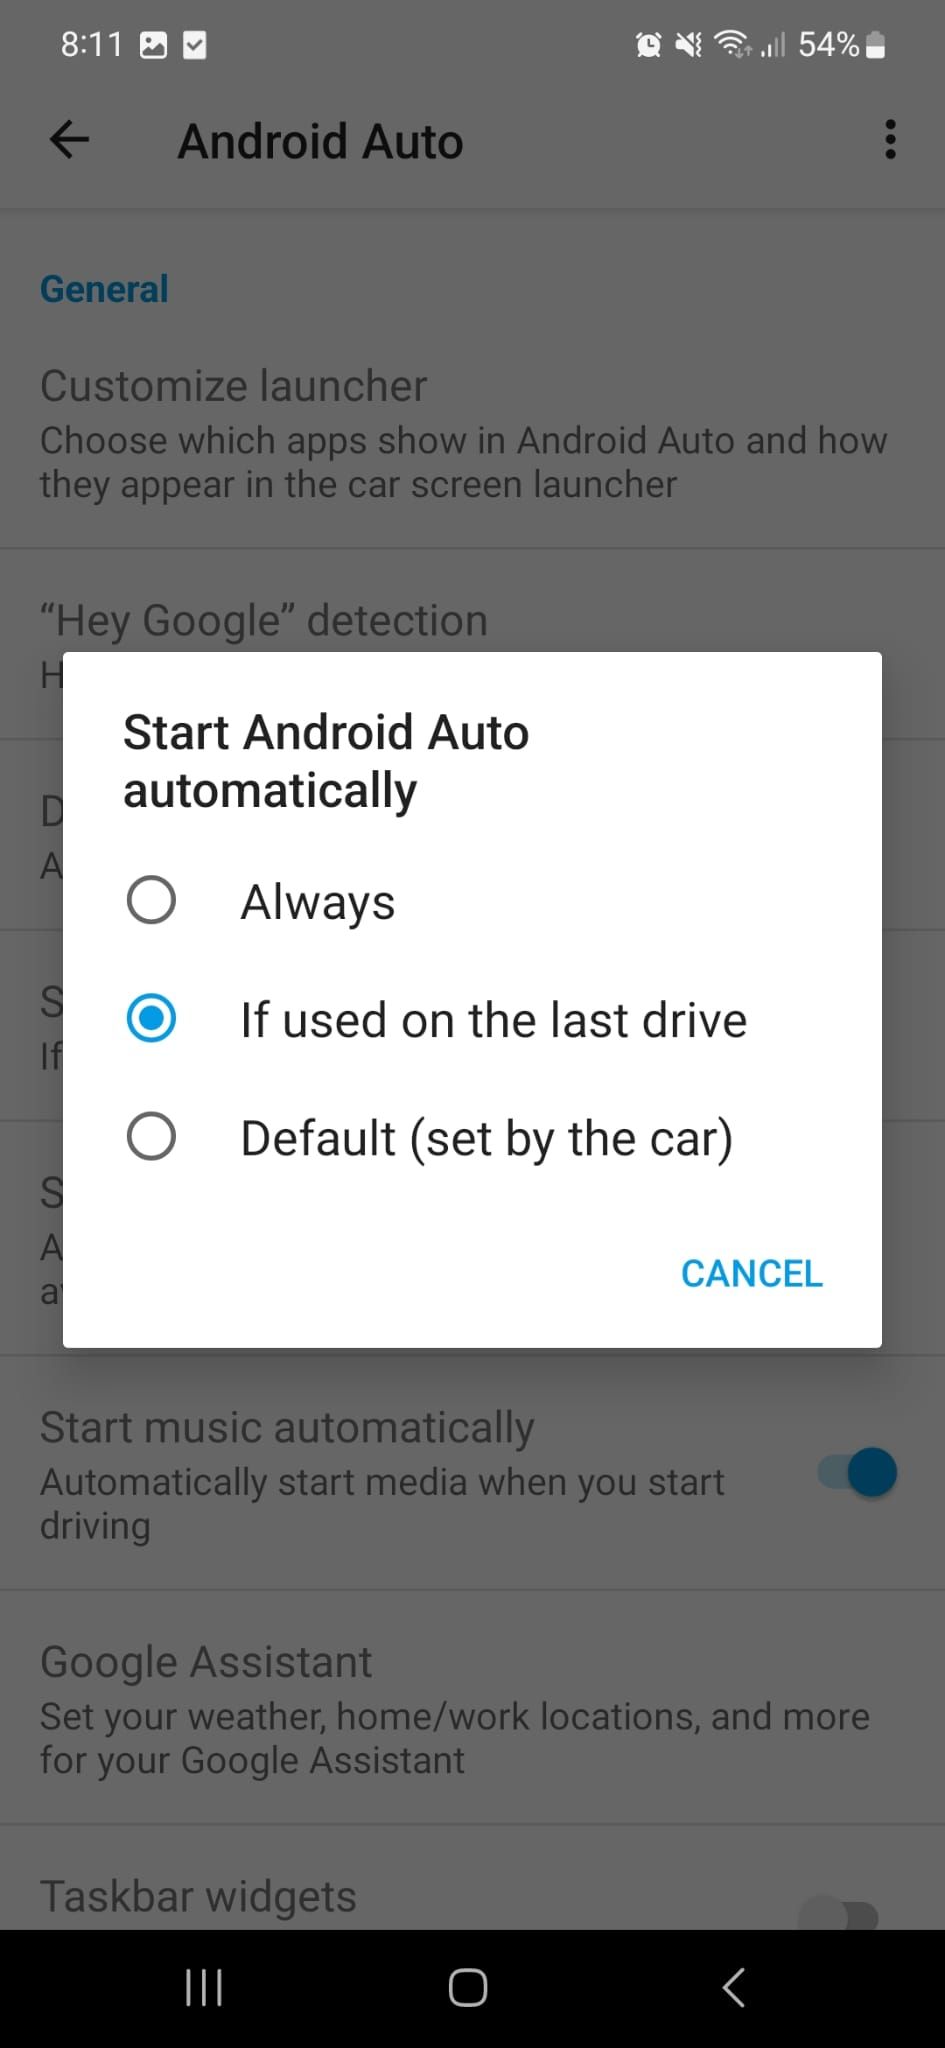 Android Auto update removes the option to turn off 'wireless